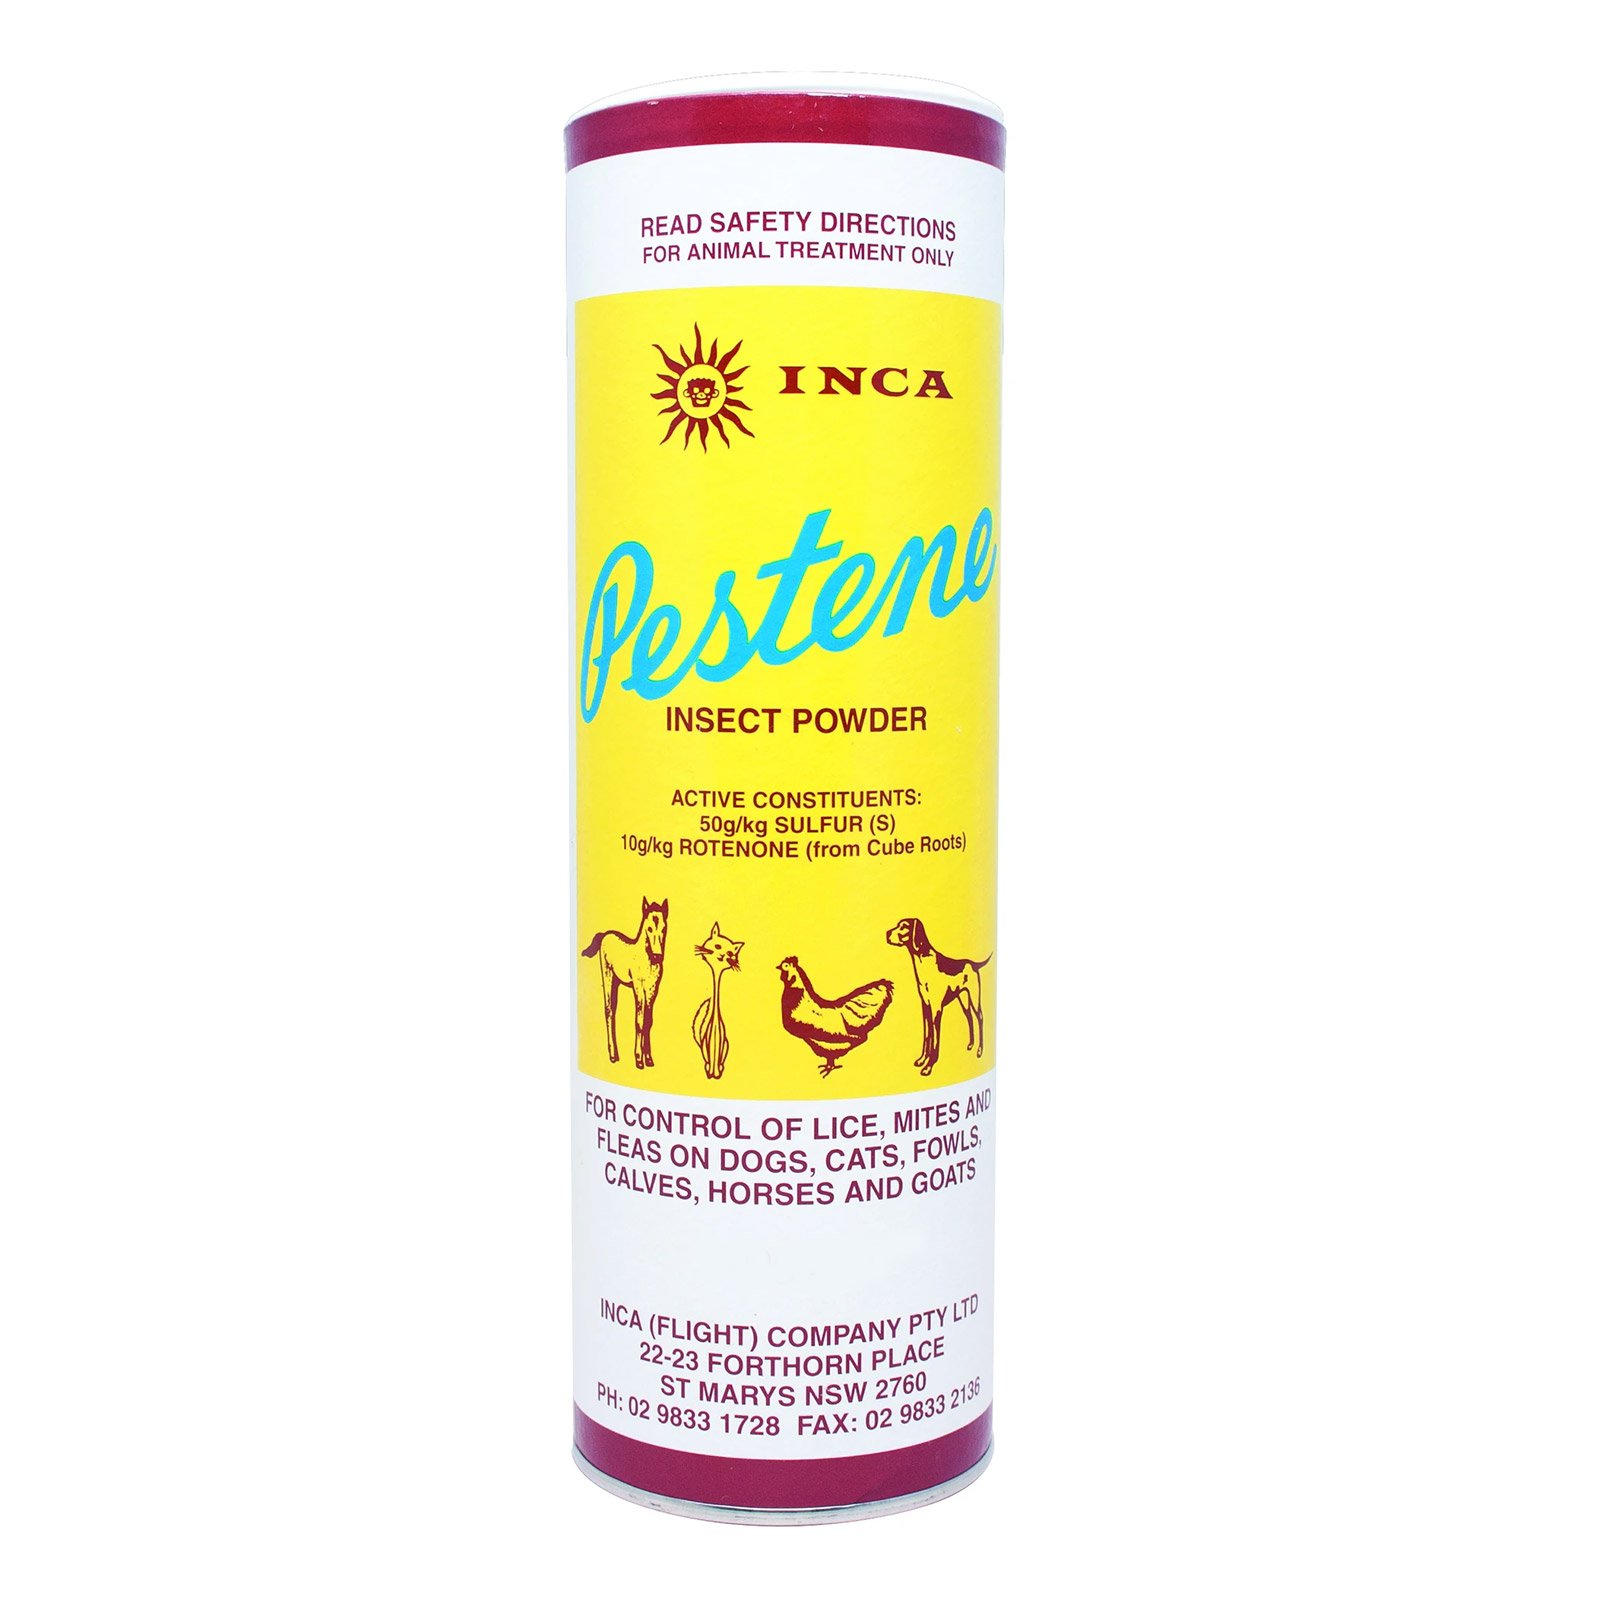 Inca Pestene Insect Powder for Fowls, Dogs, Cats, Horses and Goats